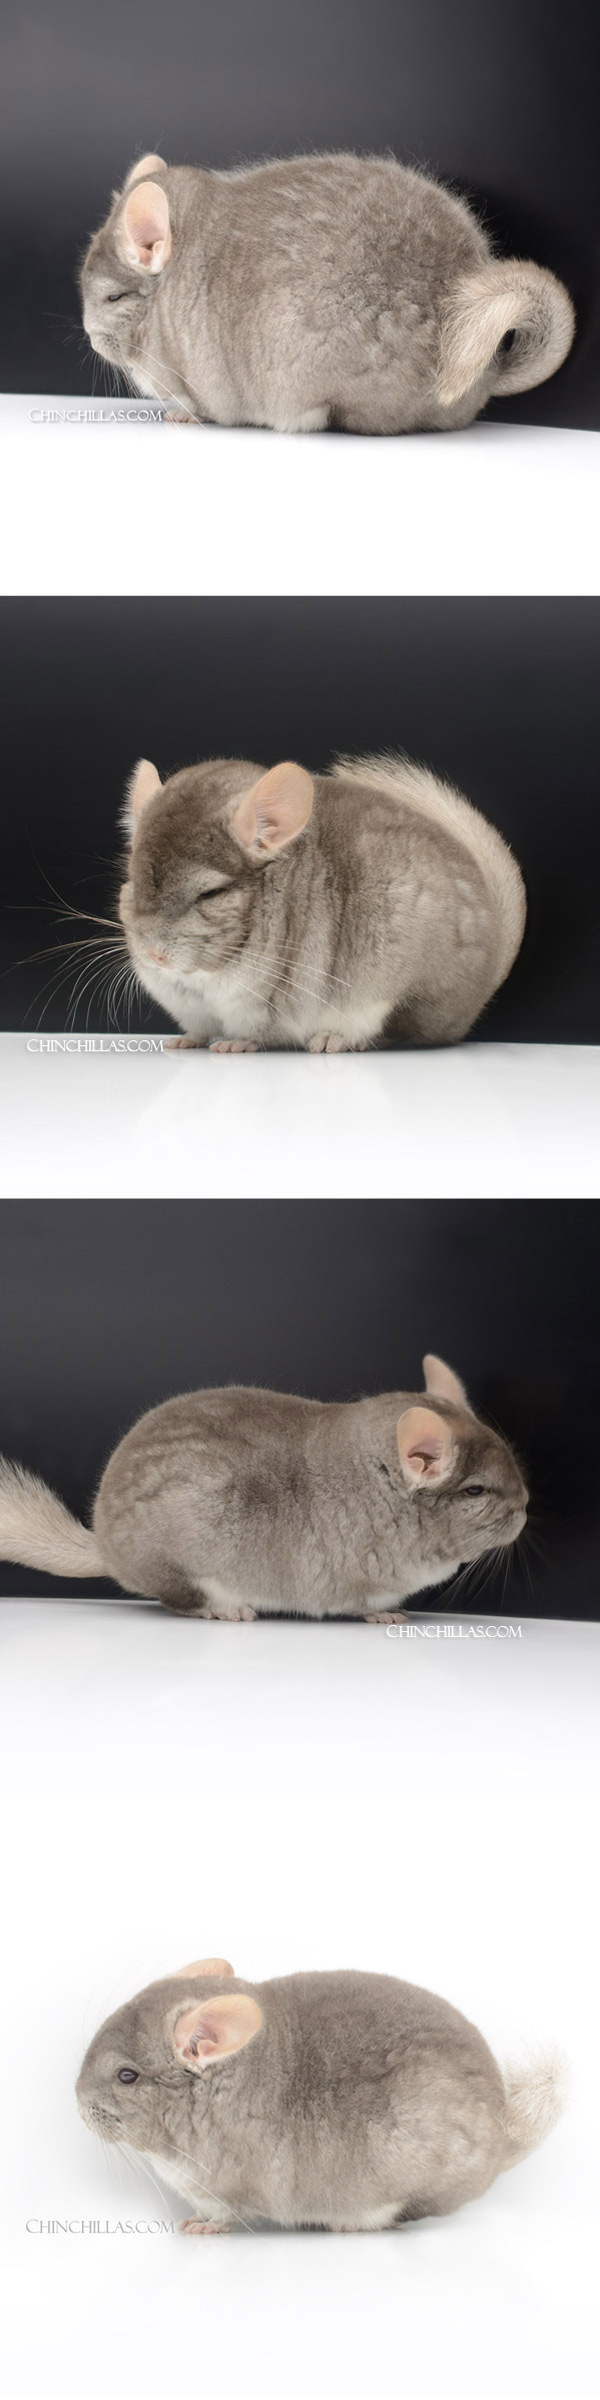 Chinchilla or related item offered for sale or export on Chinchillas.com - 23116 Extra Large Blocky Herd Improvement Quality Beige Male